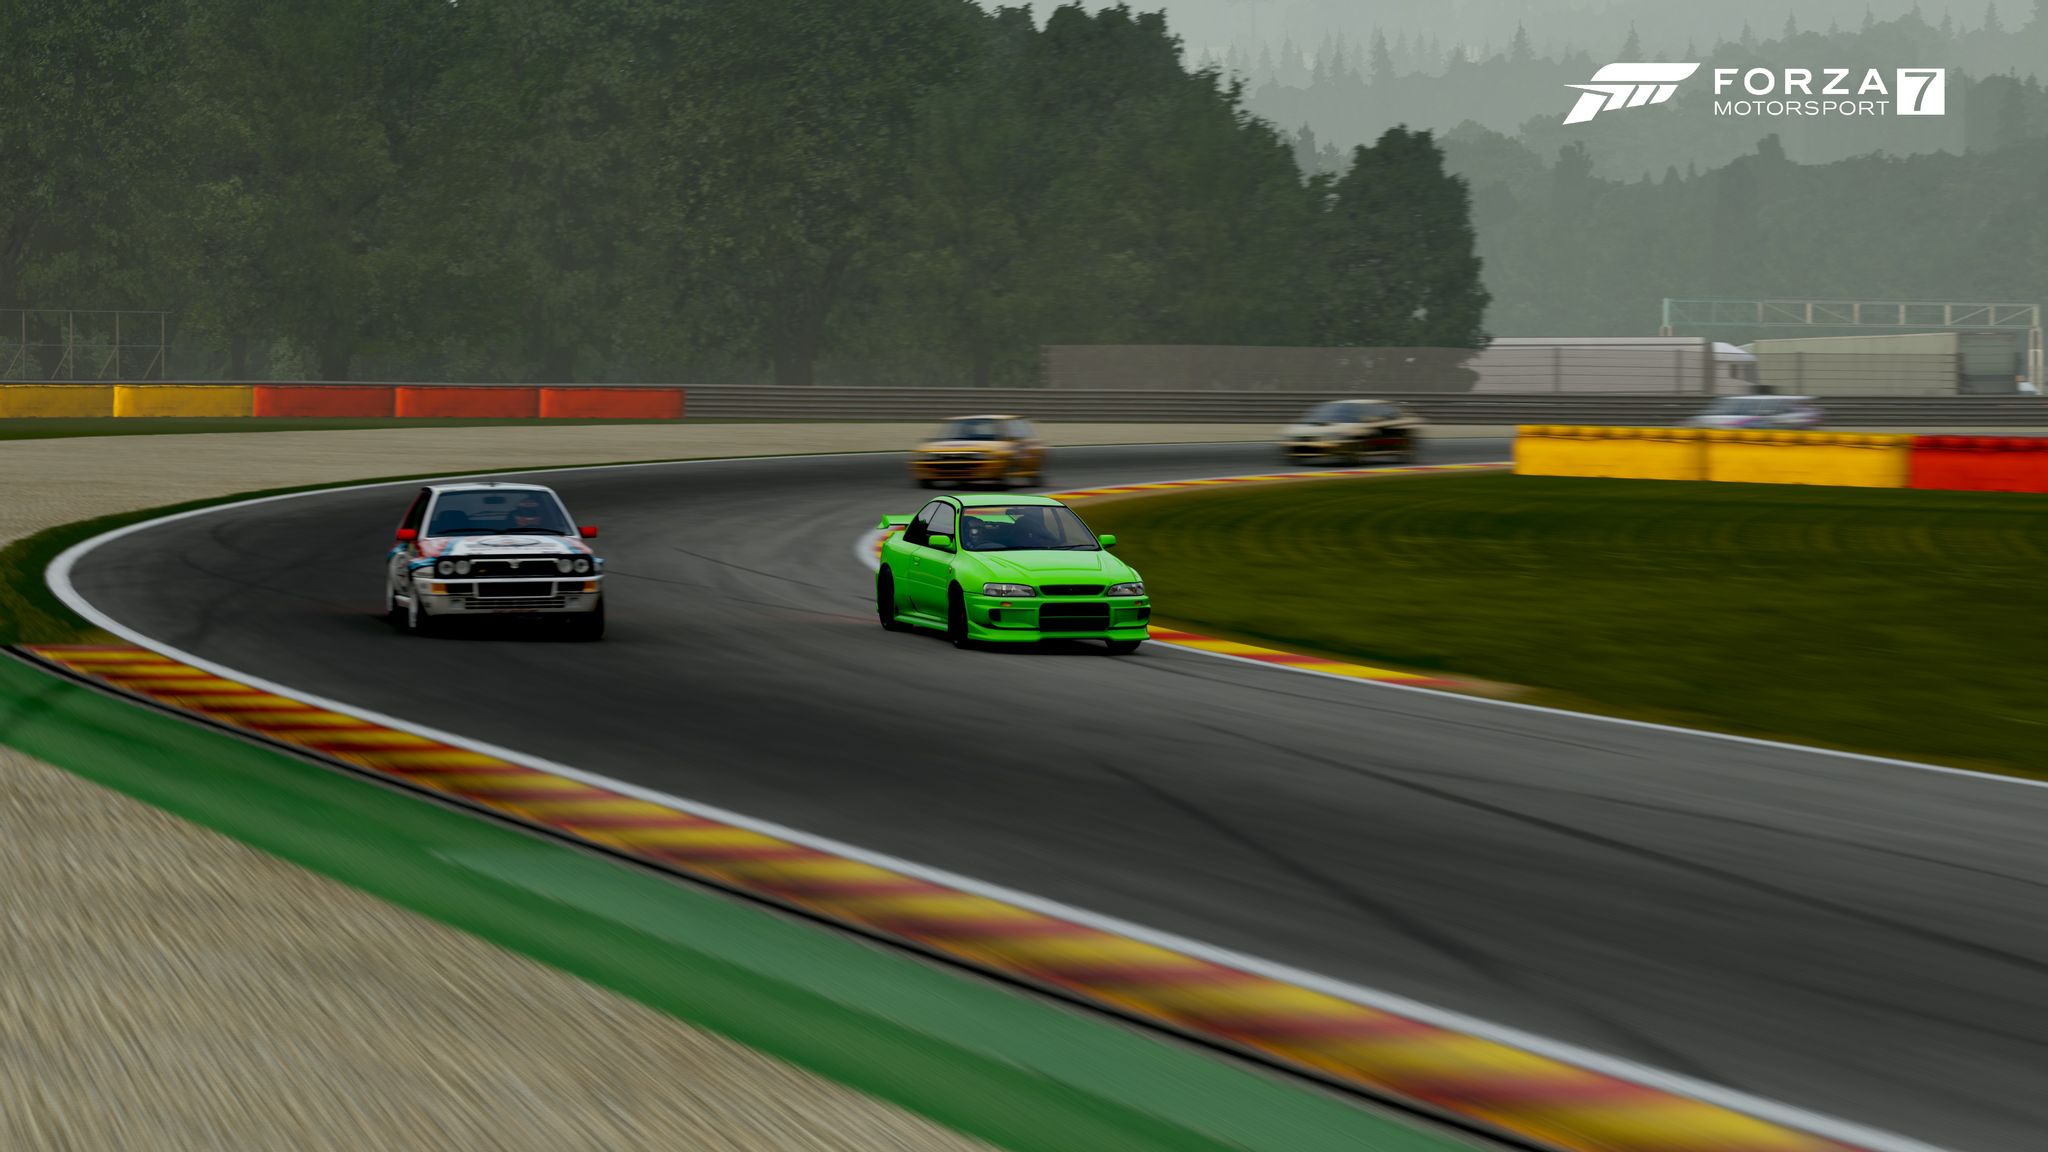 A screenshot from Forza Motorsport 7 showing a bright green Subaru Impreza WRX passing another car on the inside around a corner.